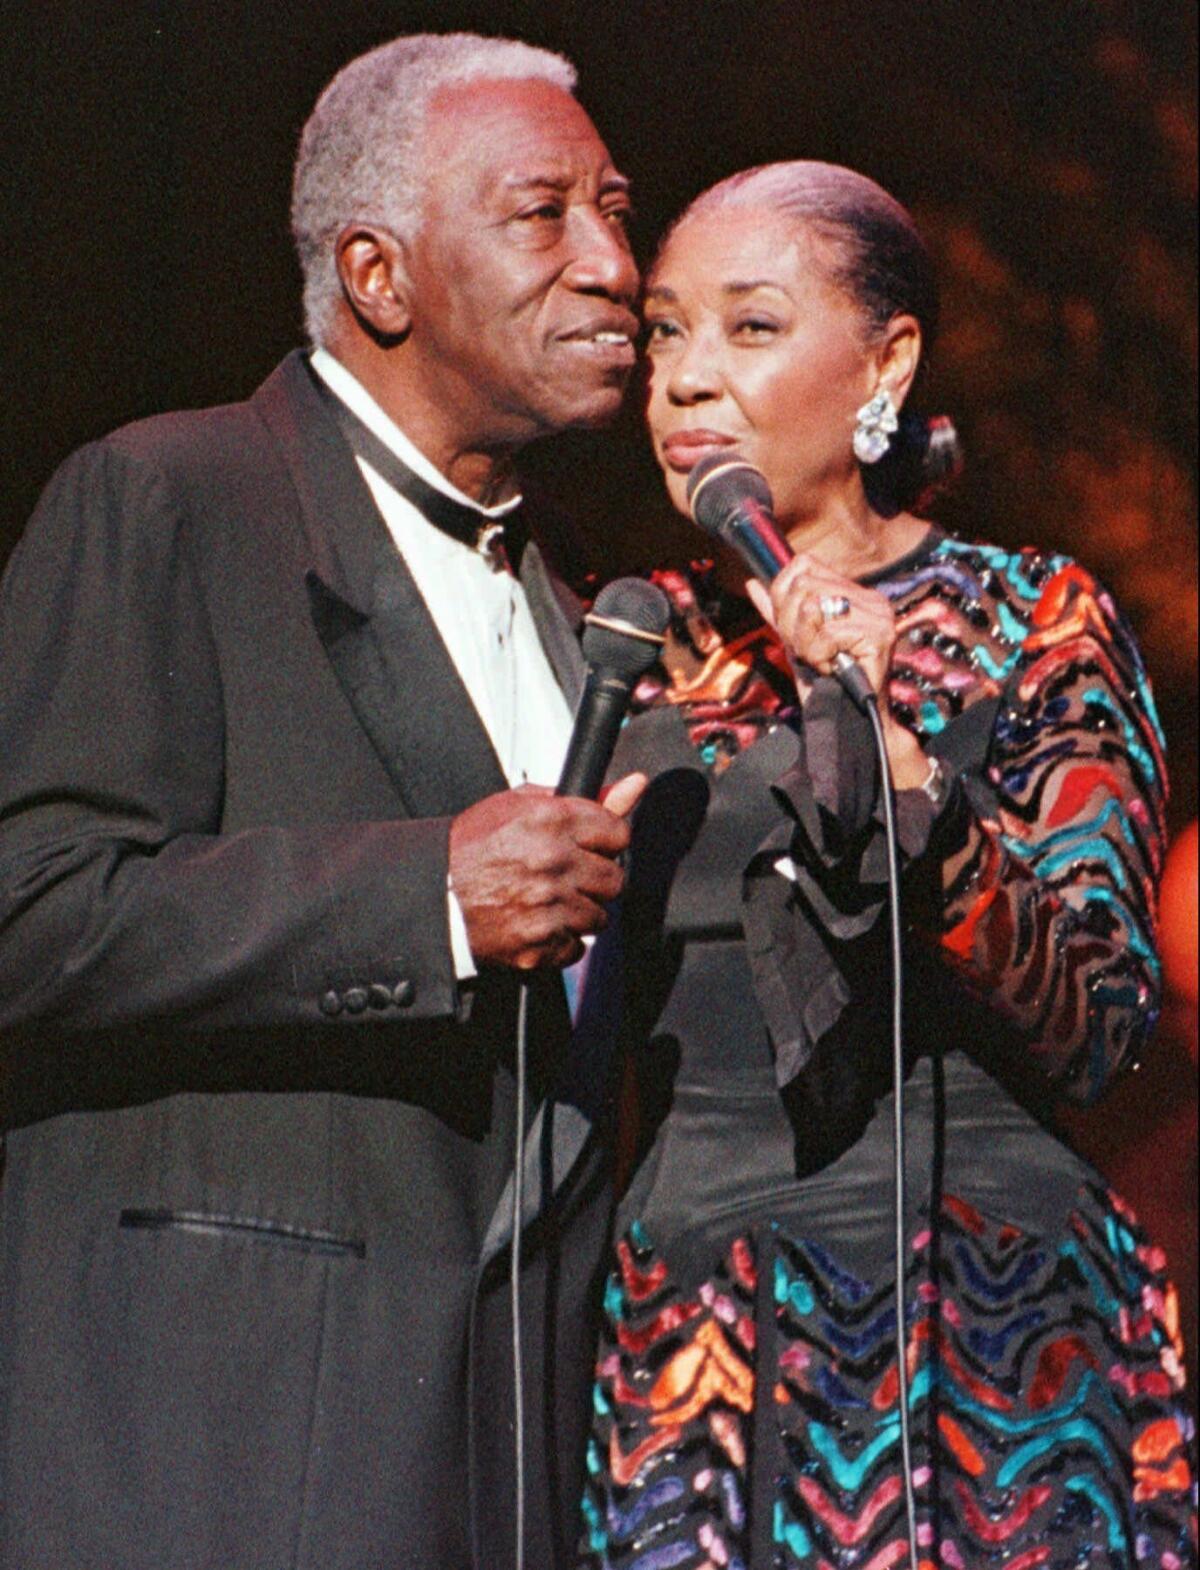 Famed jazz vocalists Joe Williams and Nancy Wilson sing a duet in 1999.